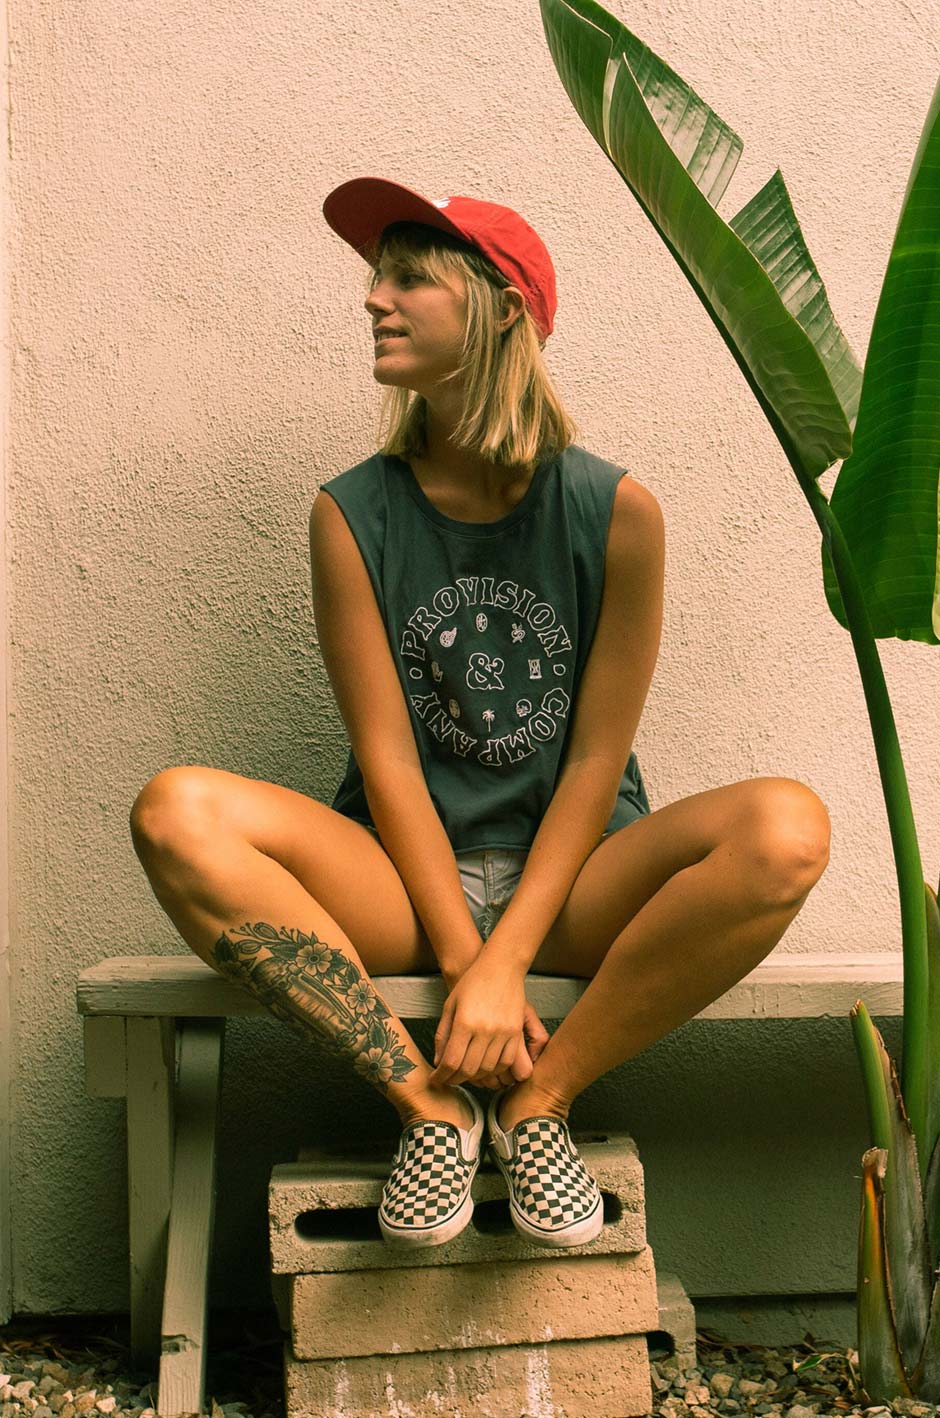 Provisions & Co (P&Co) - Elise, Skateboarder &Co